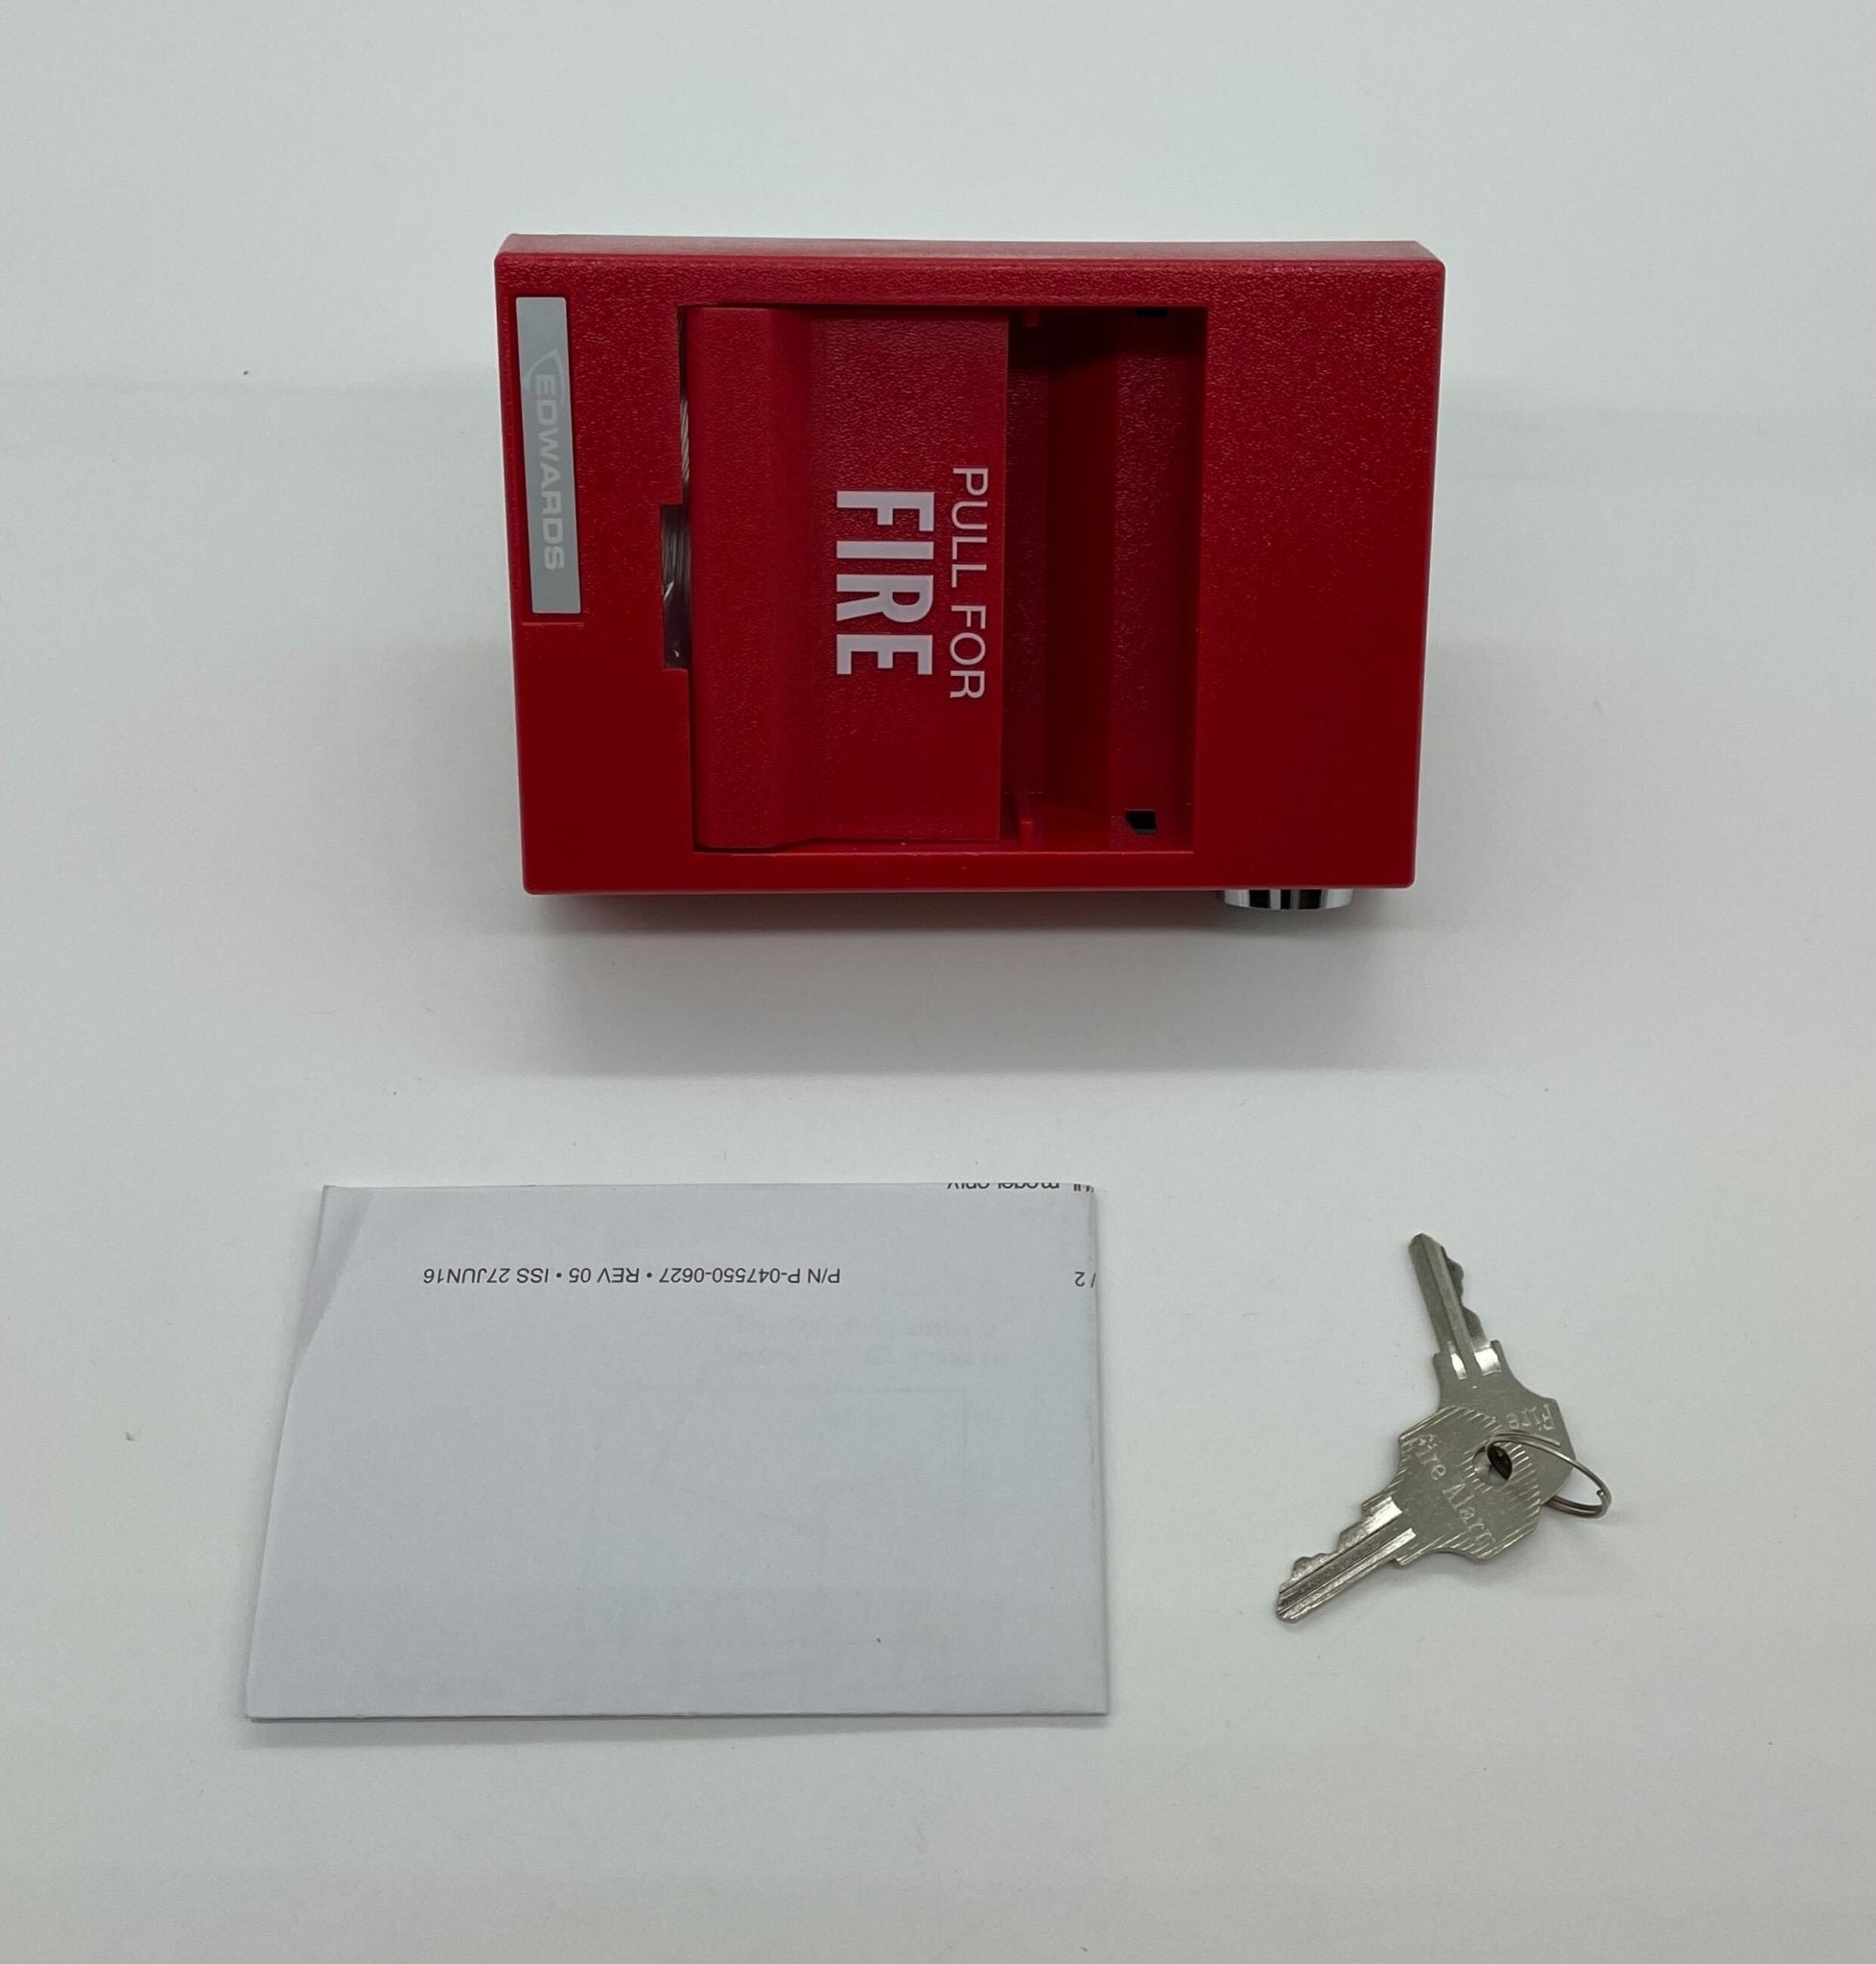 Edwards 276B-1120 - The Fire Alarm Supplier